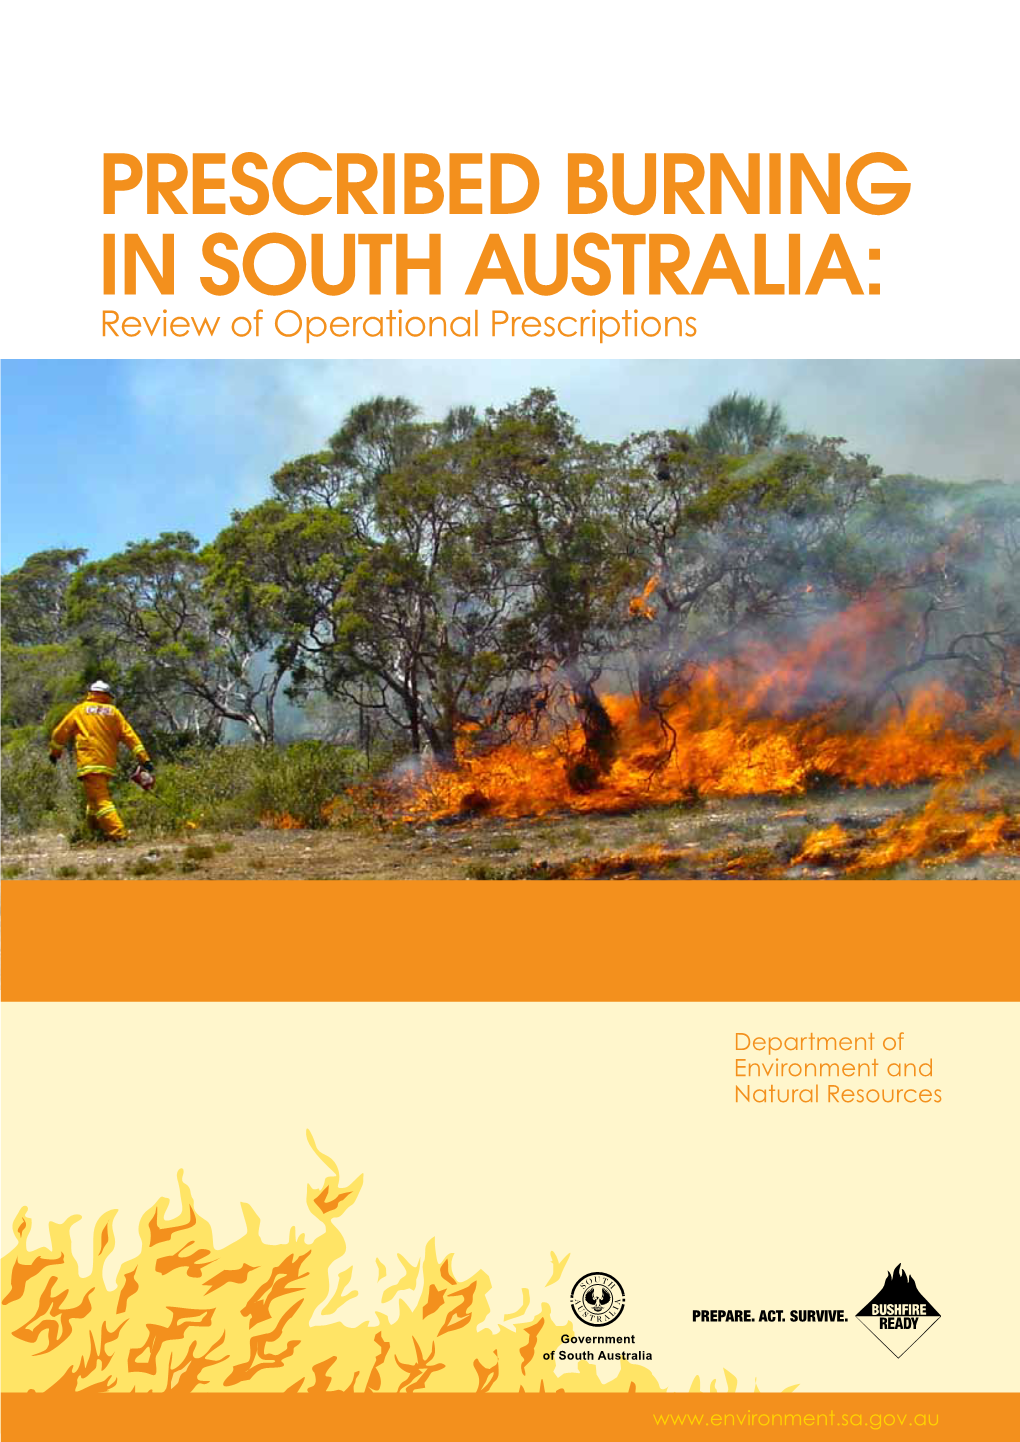 PRESCRIBED BURNING in SOUTH AUSTRALIA: Review of Operational Prescriptions